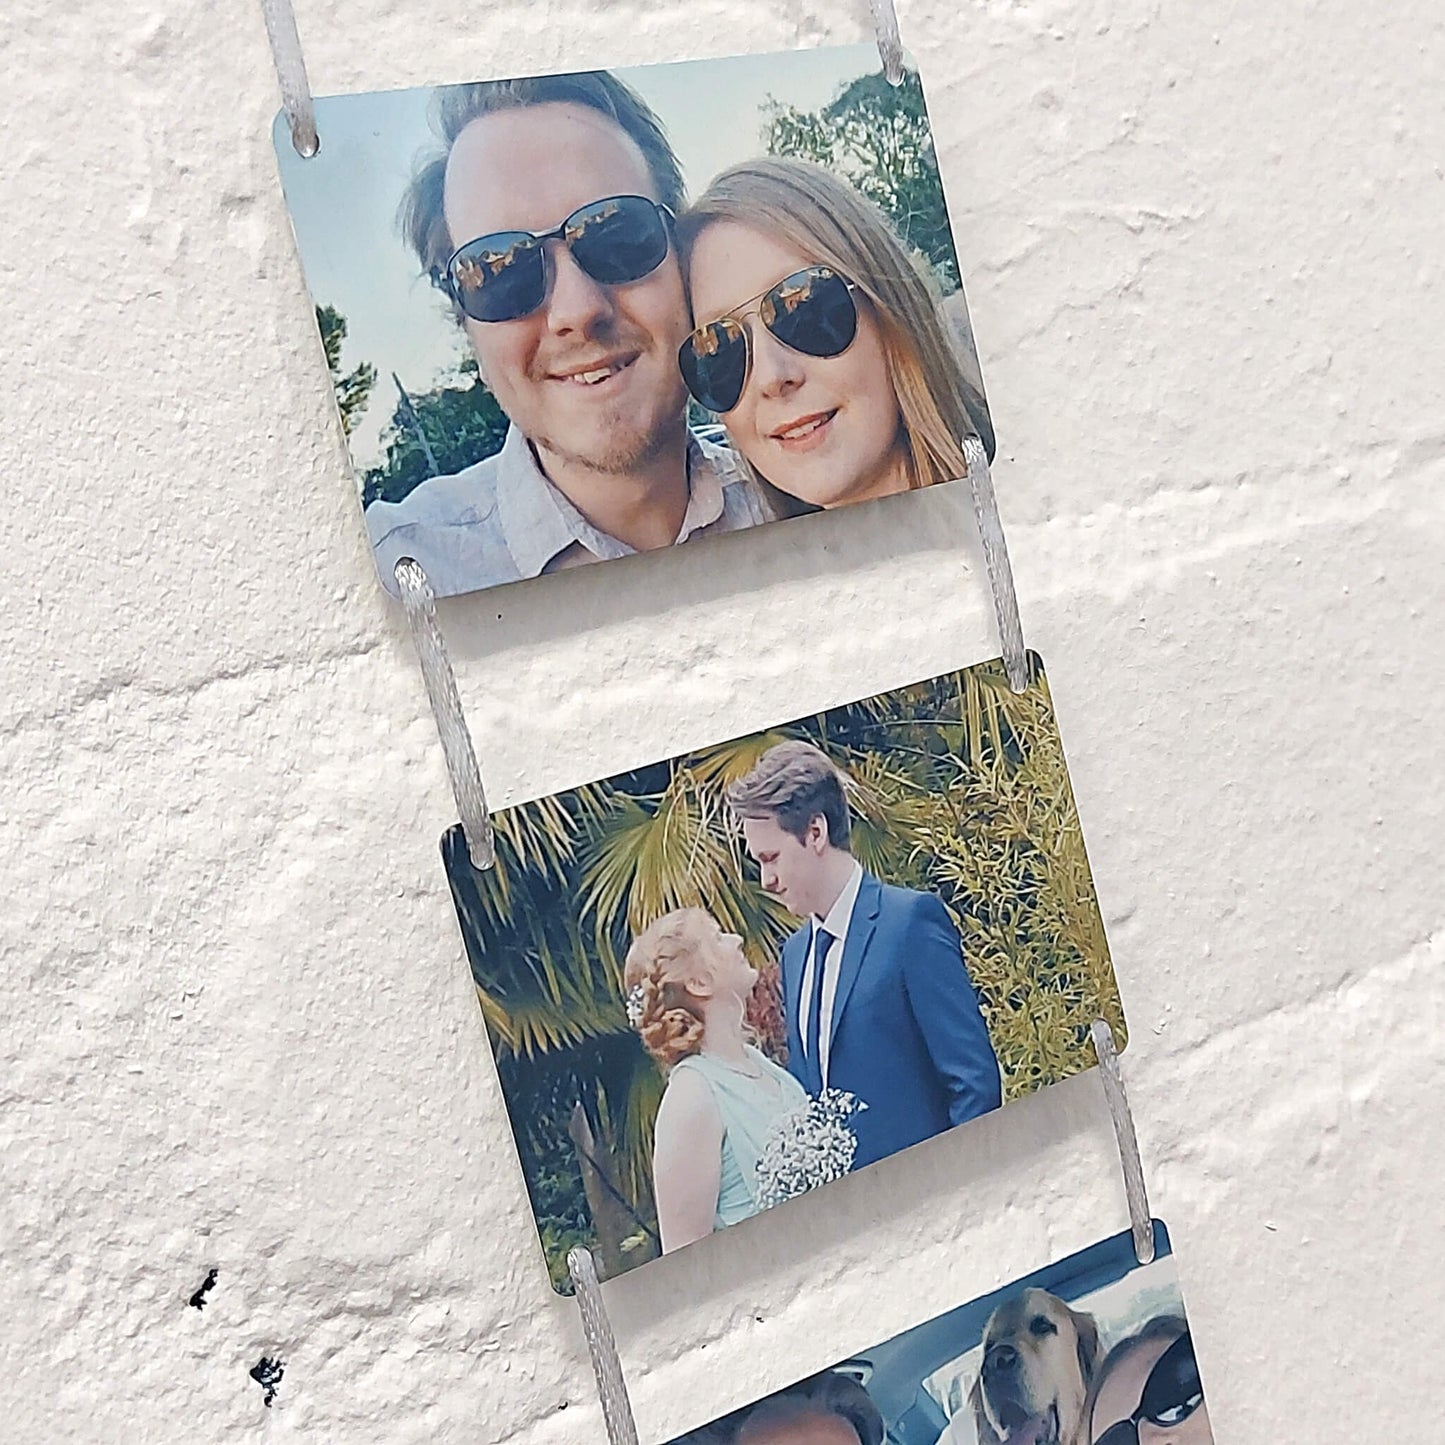 Personalised Hanging Photo Gallery